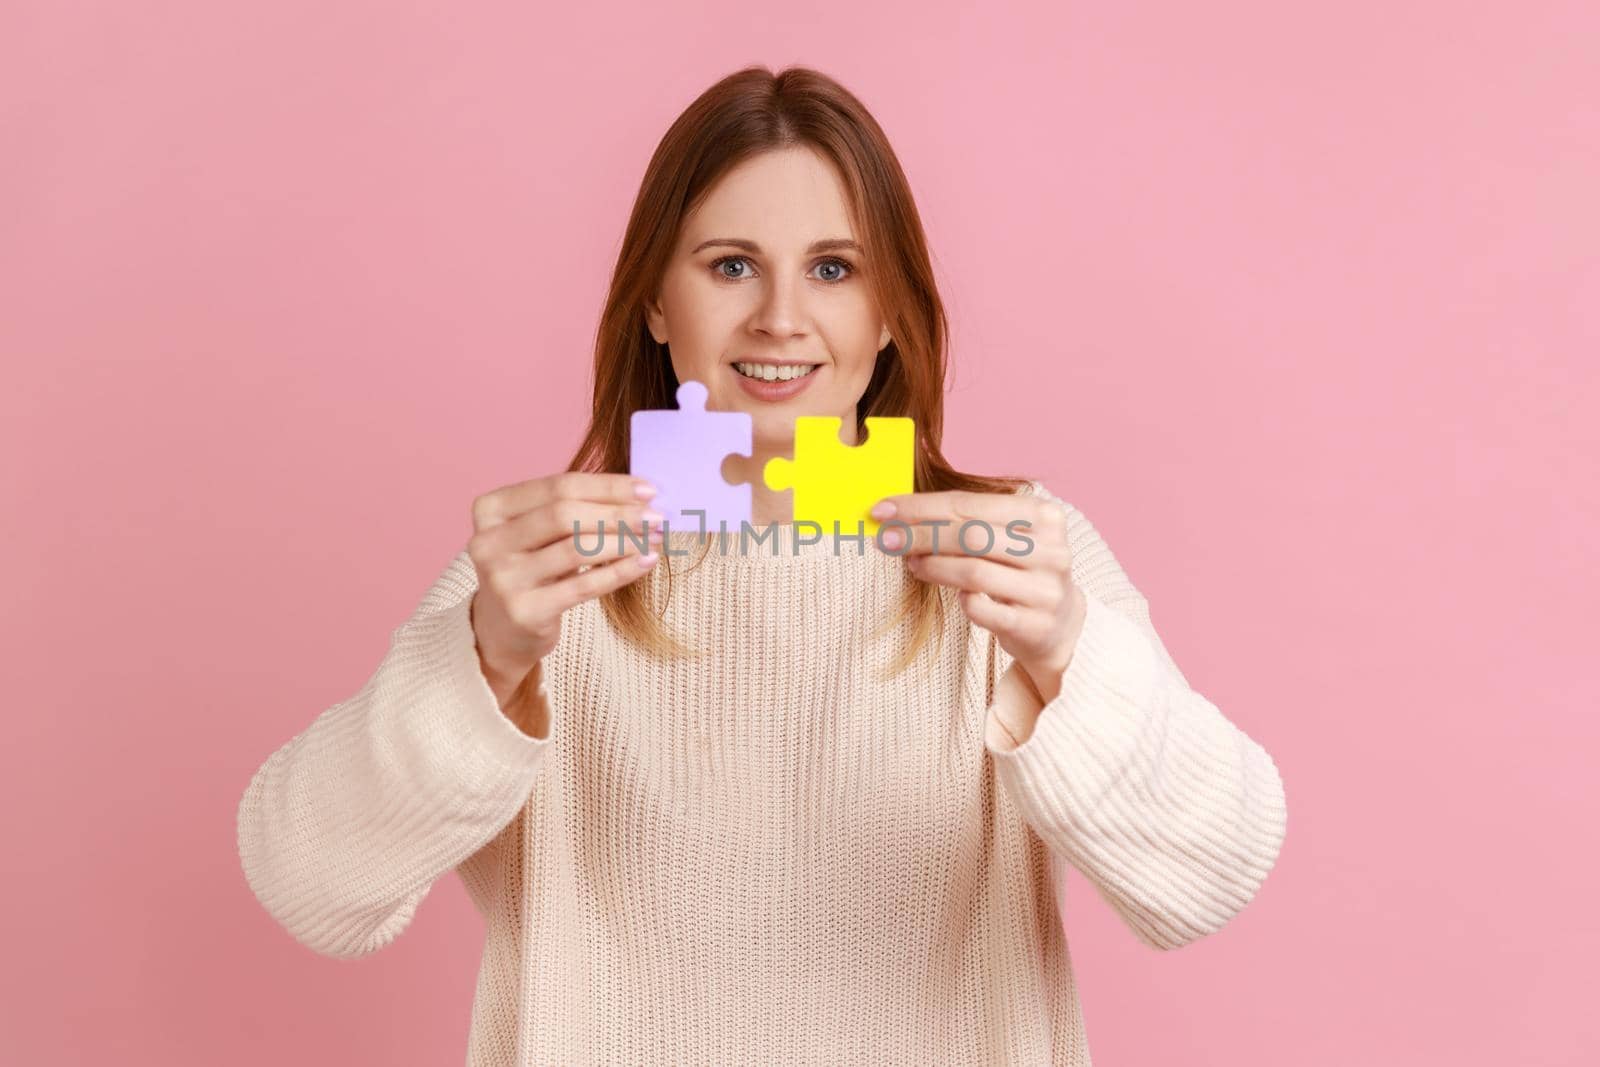 Portrait of smiling positive attractive blond woman holding yellow and purple puzzle pieces, solving tasks, looking at camera, wearing white sweater. Indoor studio shot isolated on pink background.